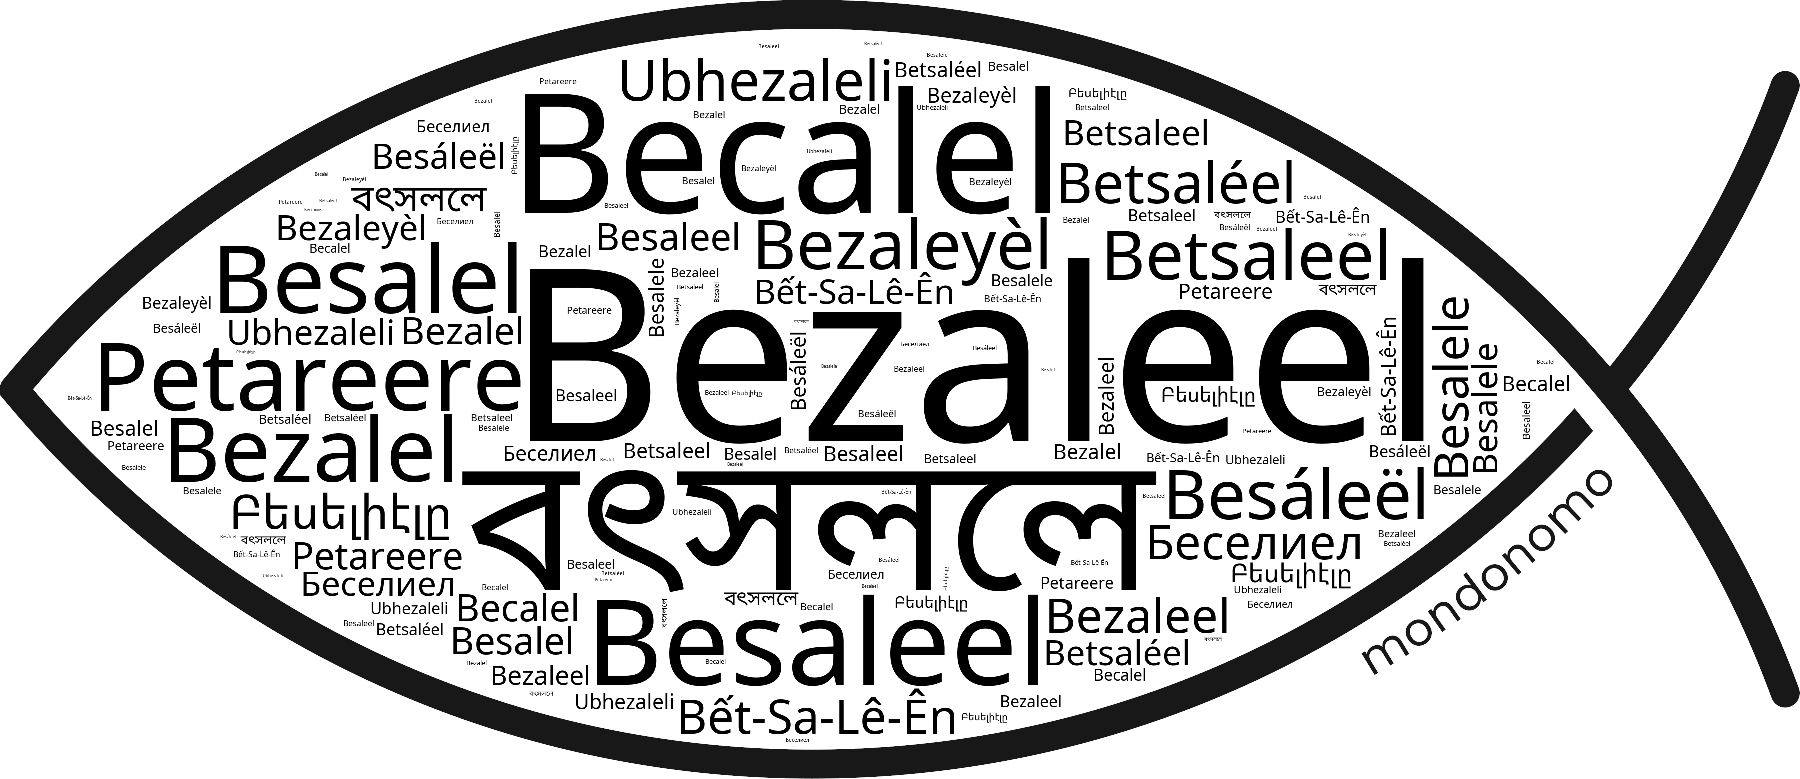 Name Bezaleel in the world's Bibles